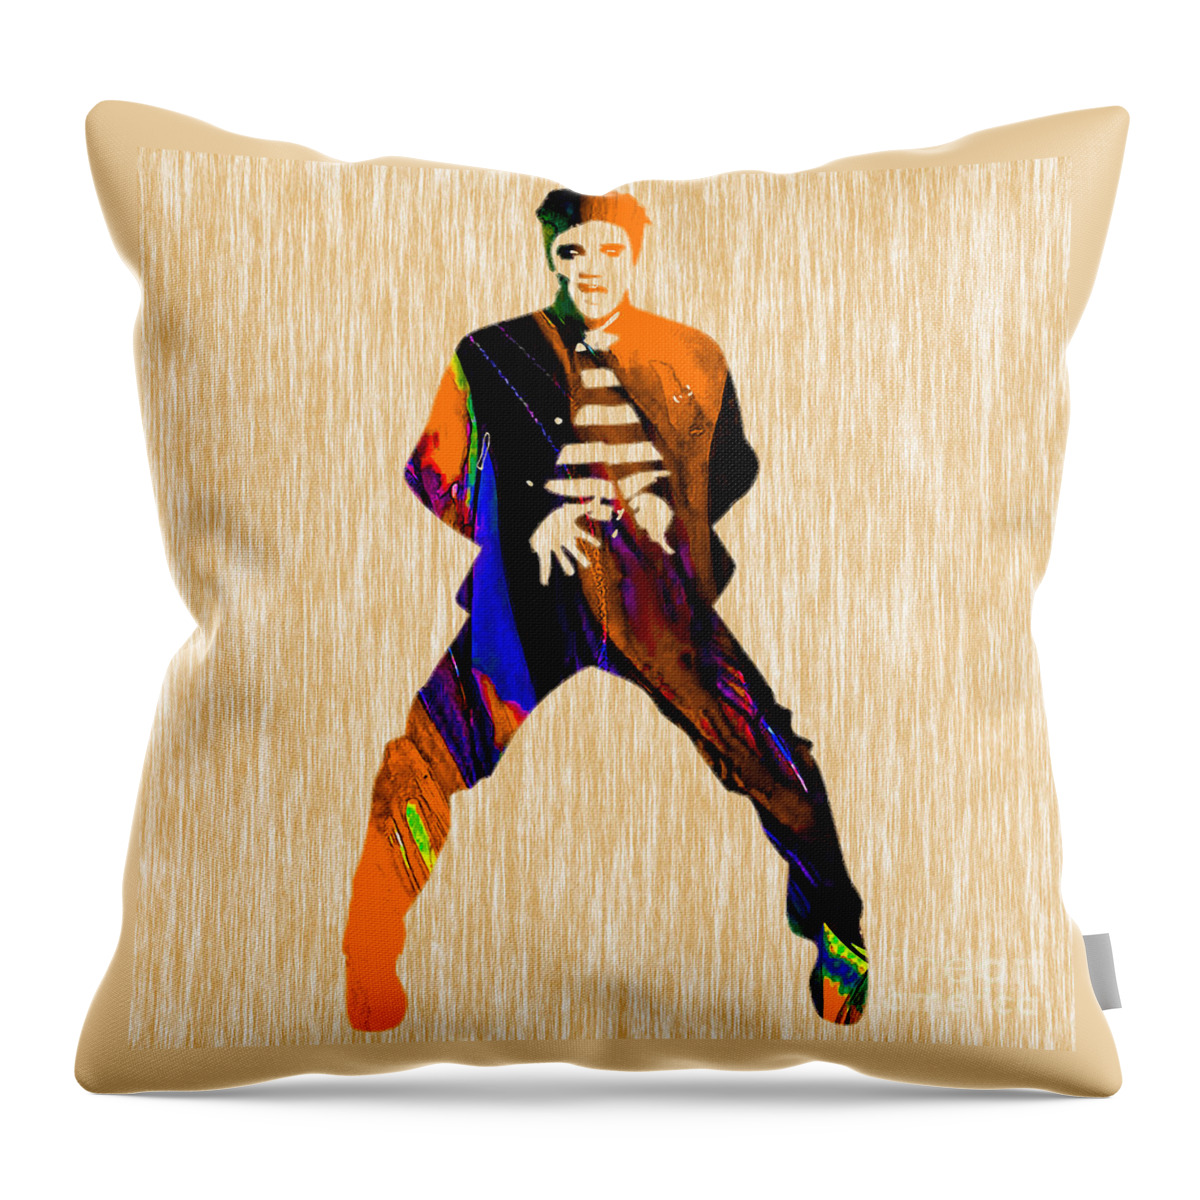 Elvis Art Throw Pillow featuring the mixed media Elvis Presley #4 by Marvin Blaine